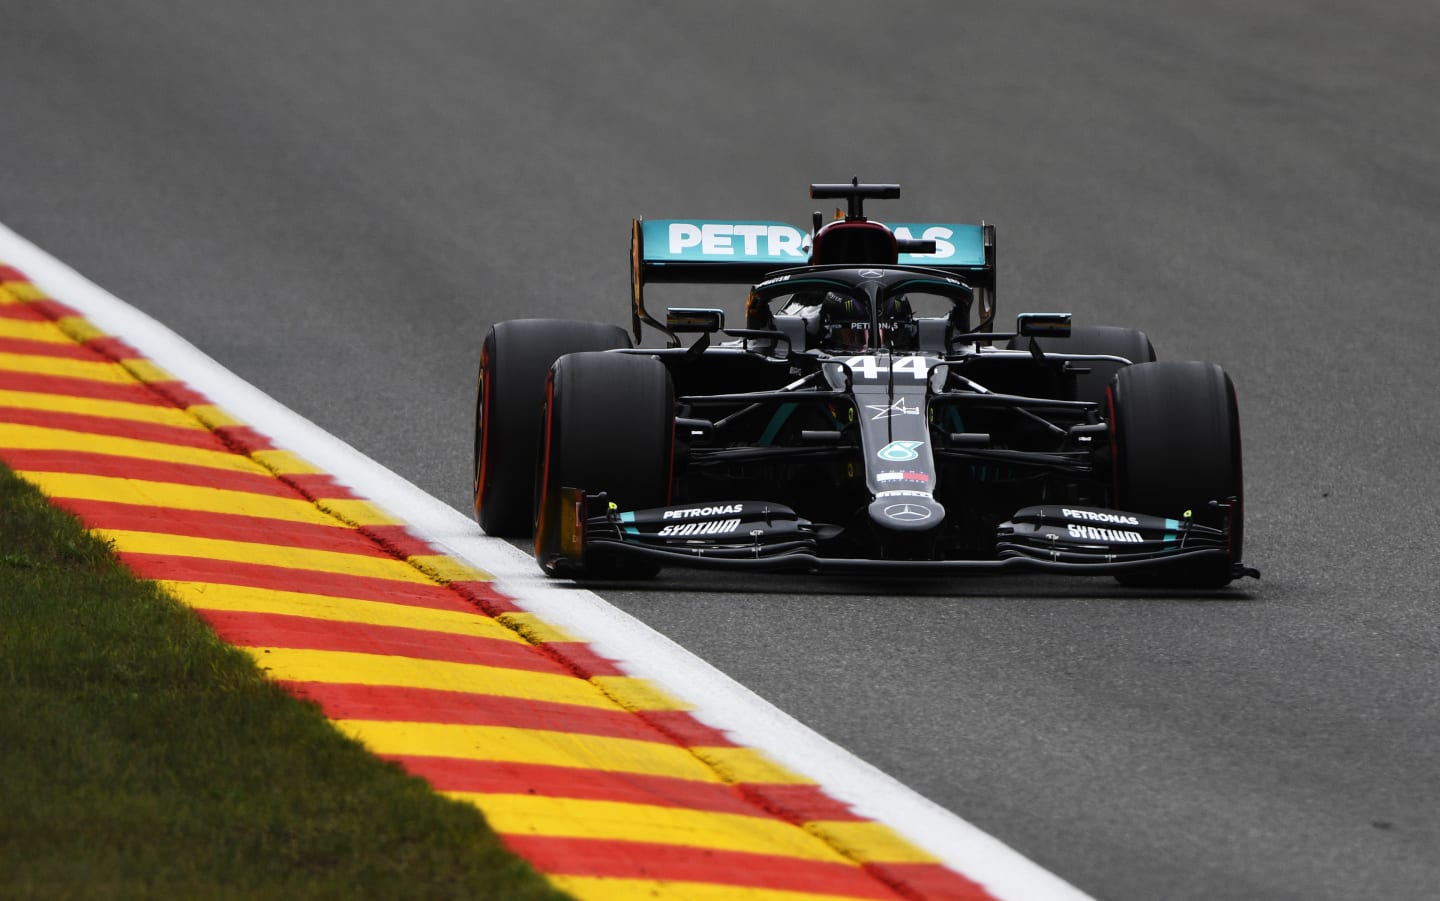 SPA, BELGIUM - AUGUST 28: Lewis Hamilton of Great Britain driving the (44) Mercedes AMG Petronas F1 Team Mercedes W11 drives during practice for the F1 Grand Prix of Belgium at Circuit de Spa-Francorchamps on August 28, 2020 in Spa, Belgium. (Photo by Rudy Carezzevoli/Getty Images)